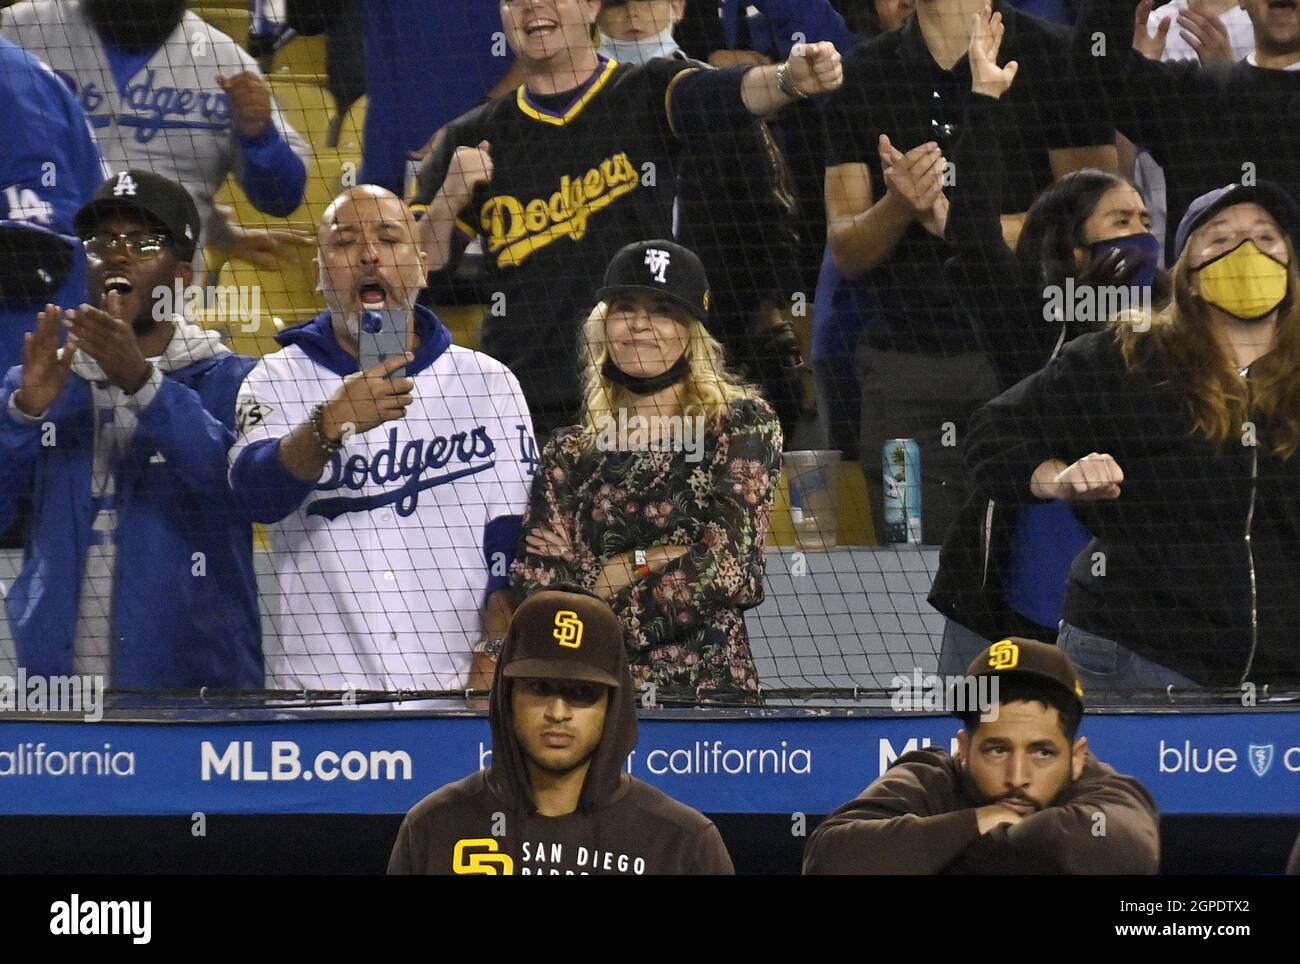 Los Angeles, USA. 29th Sep, 2021. Actress Chelsea Handler and her boyfriend Jo Koy attend the Los Angeles Dodgers game against the San Diego Padres at Dodger Stadium in Los Angeles on Tuesday, September 28, 2021. The Dodgers defeated the Padres 2-1 behind seven shutout innings from Walker Buehler. Photo by Jim Ruymen/UPI Credit: UPI/Alamy Live News Stock Photo